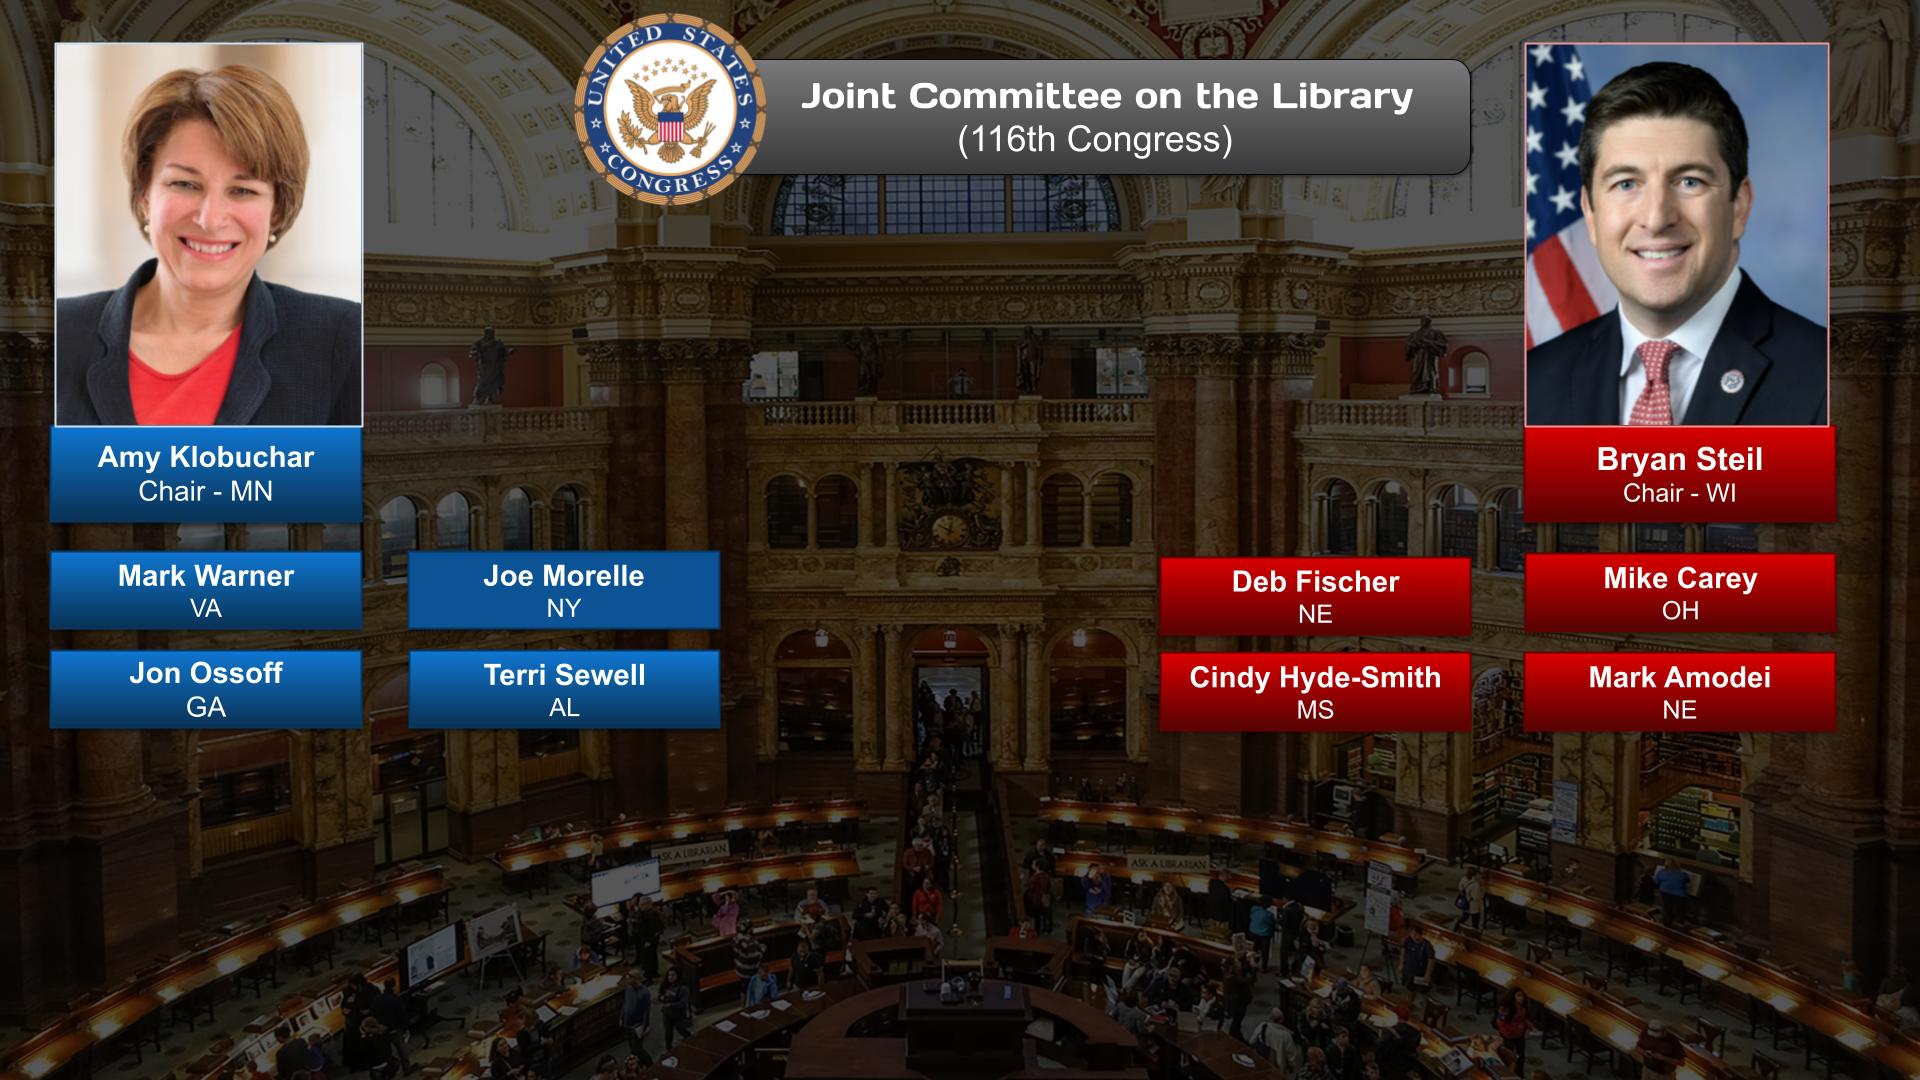 Joint Committee on the Library